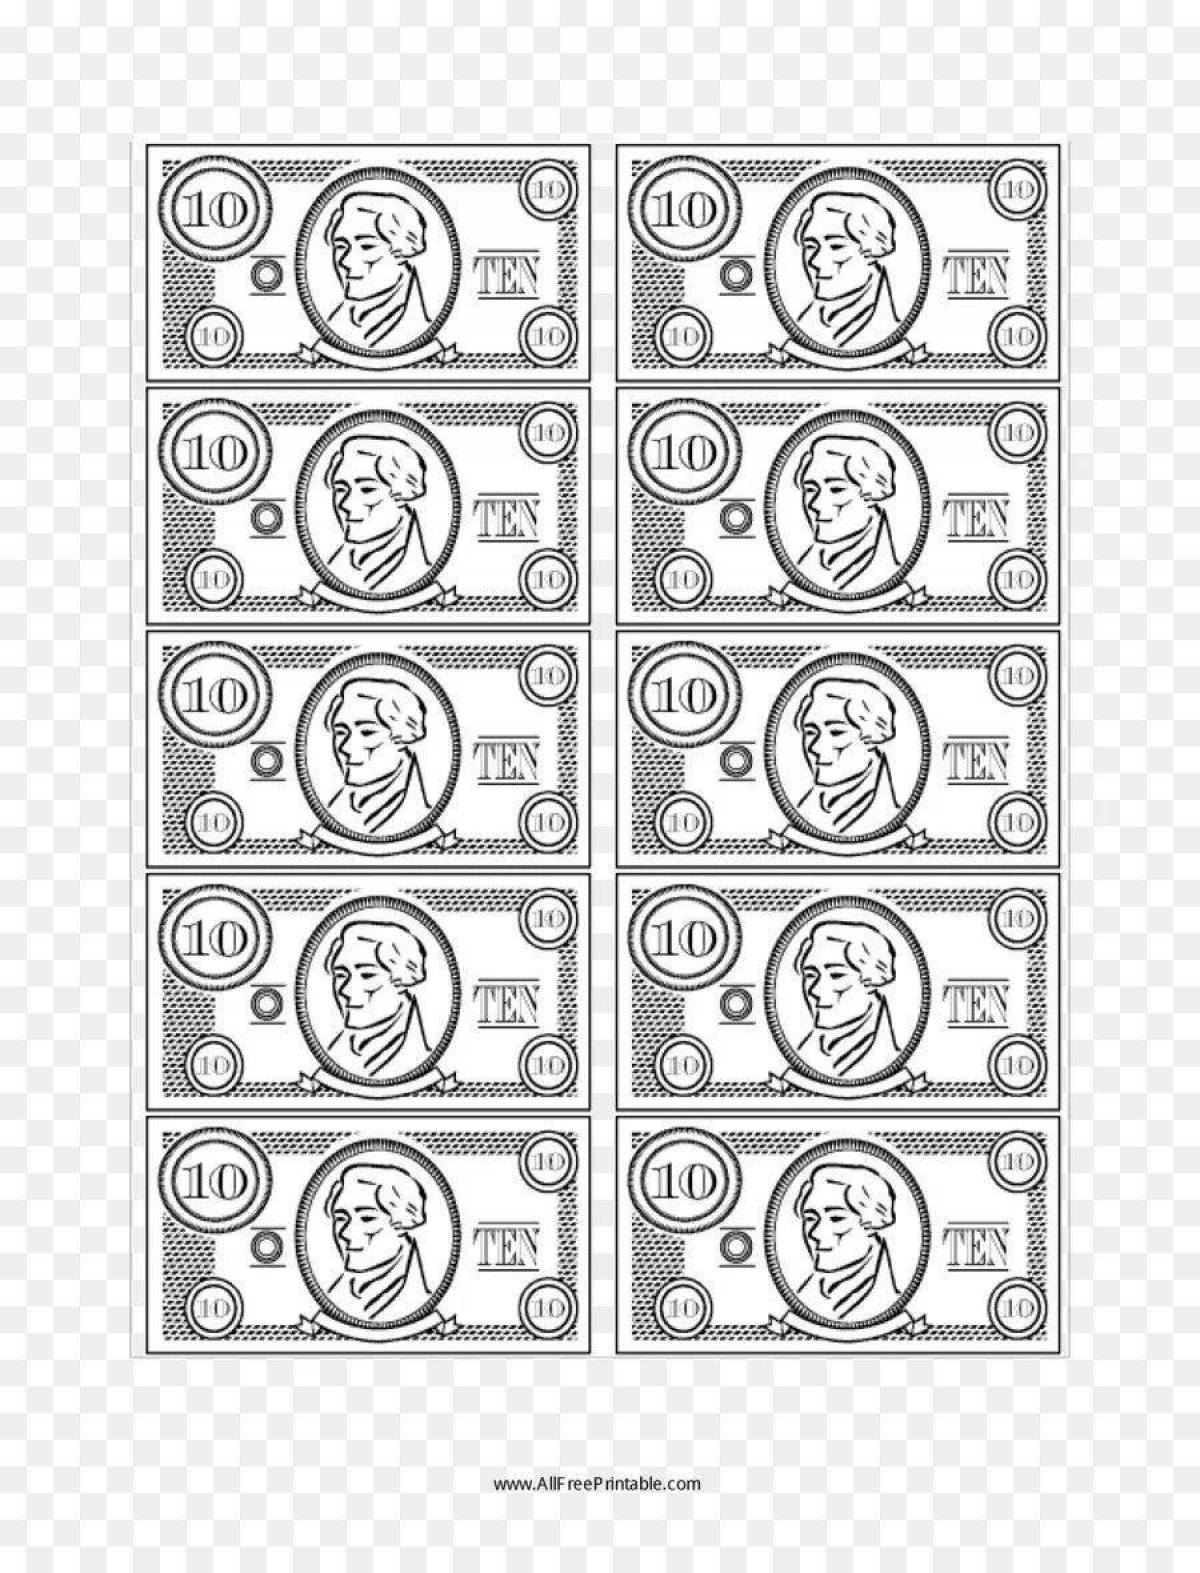 Fun money to play shop coloring page for kids